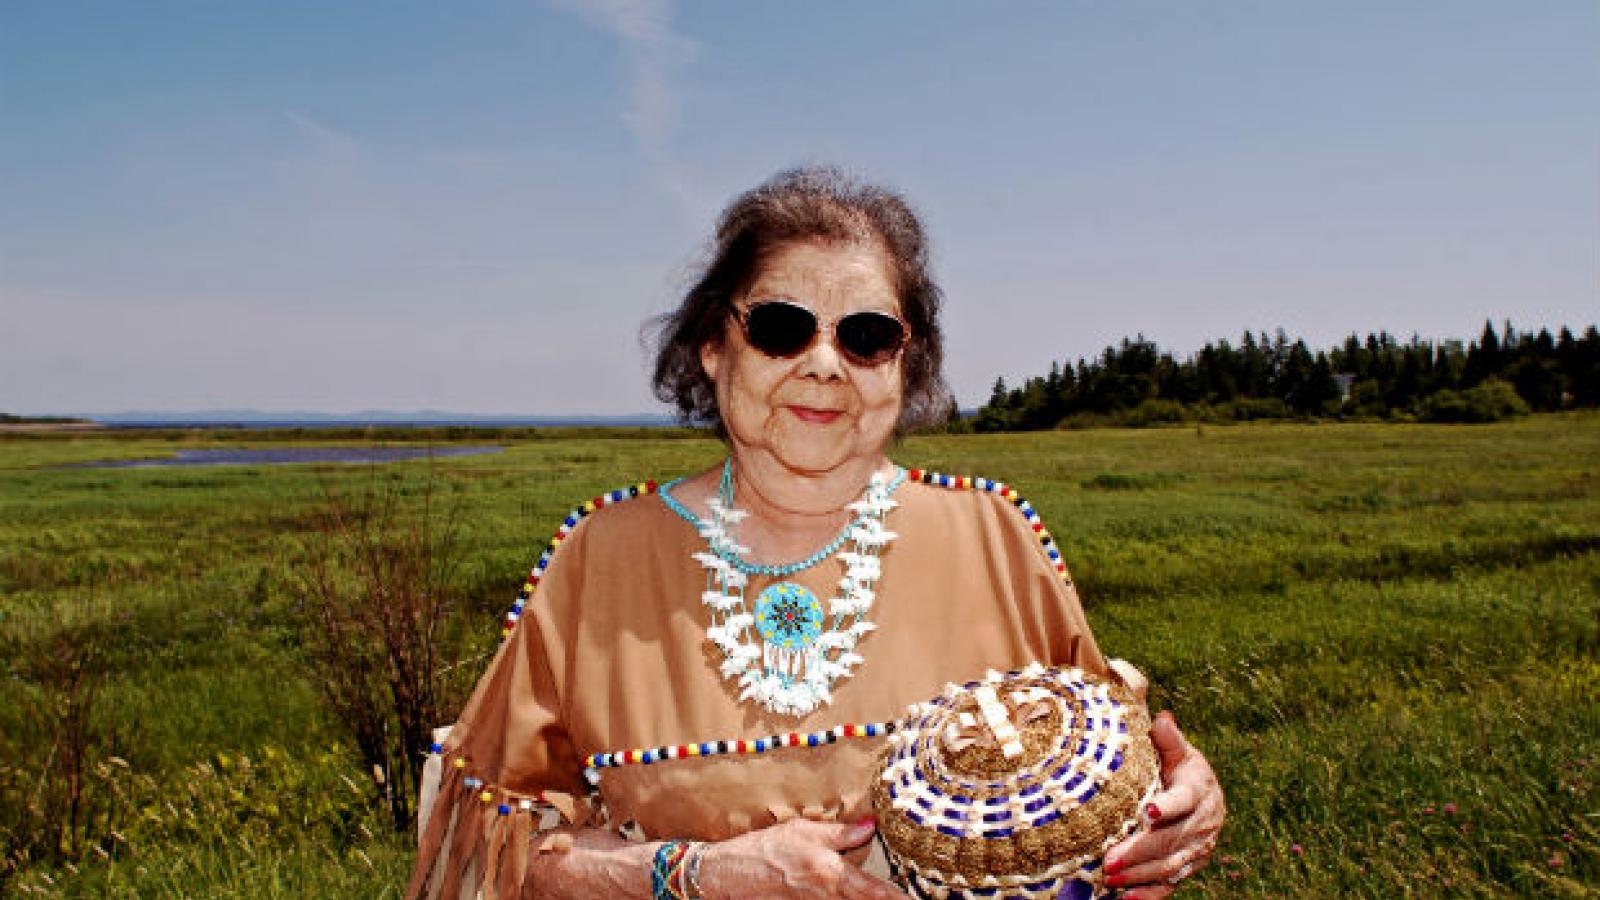 Woman in traditional dress holding a woven basket and standing in a large field.